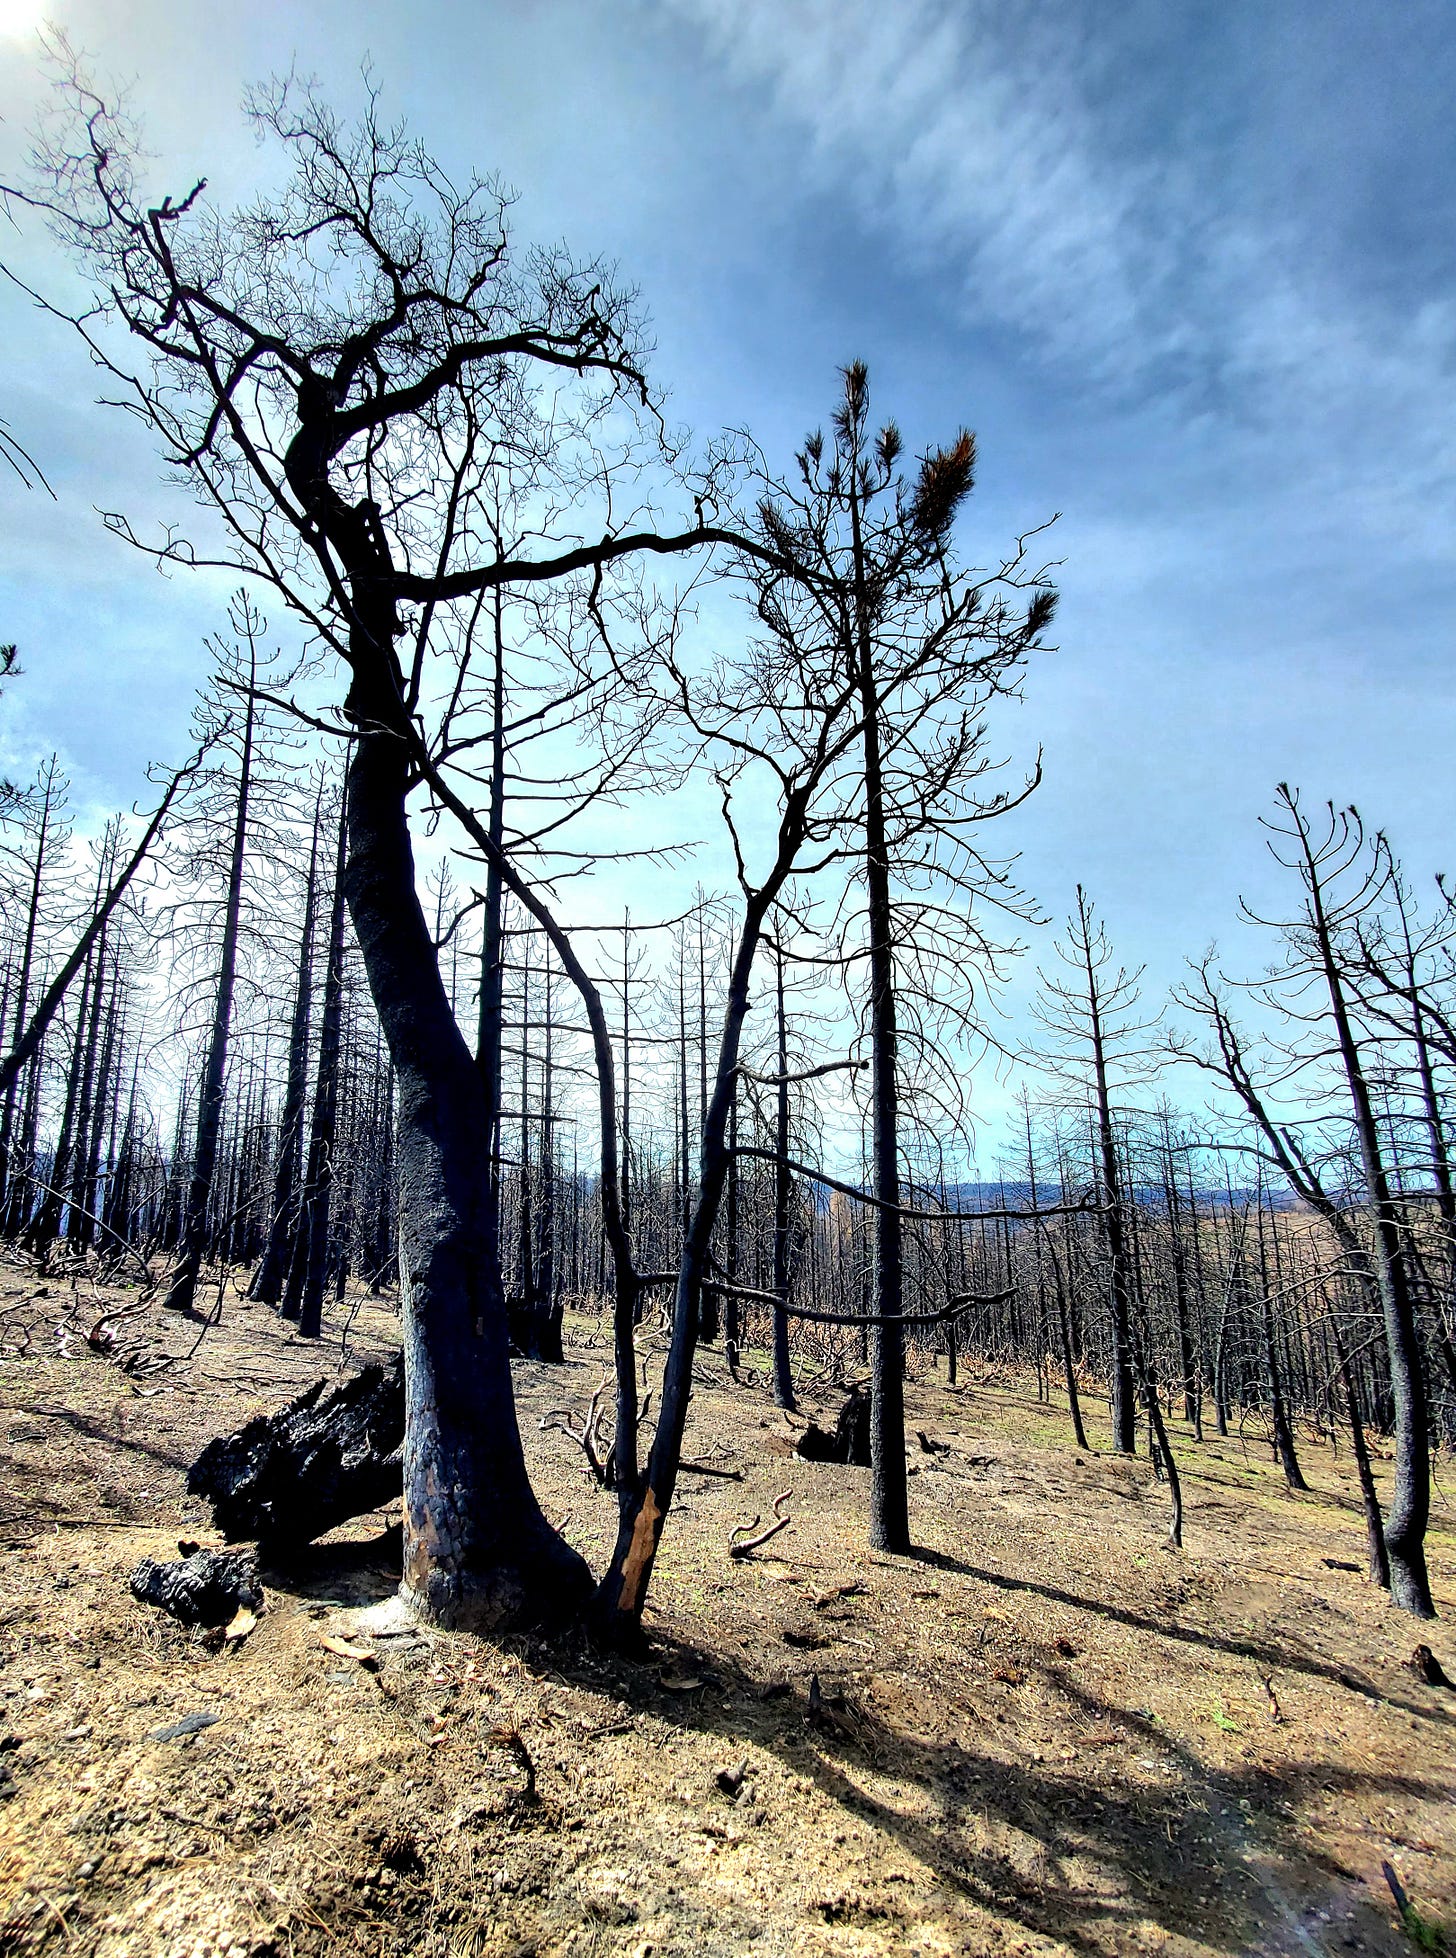 A burned forest